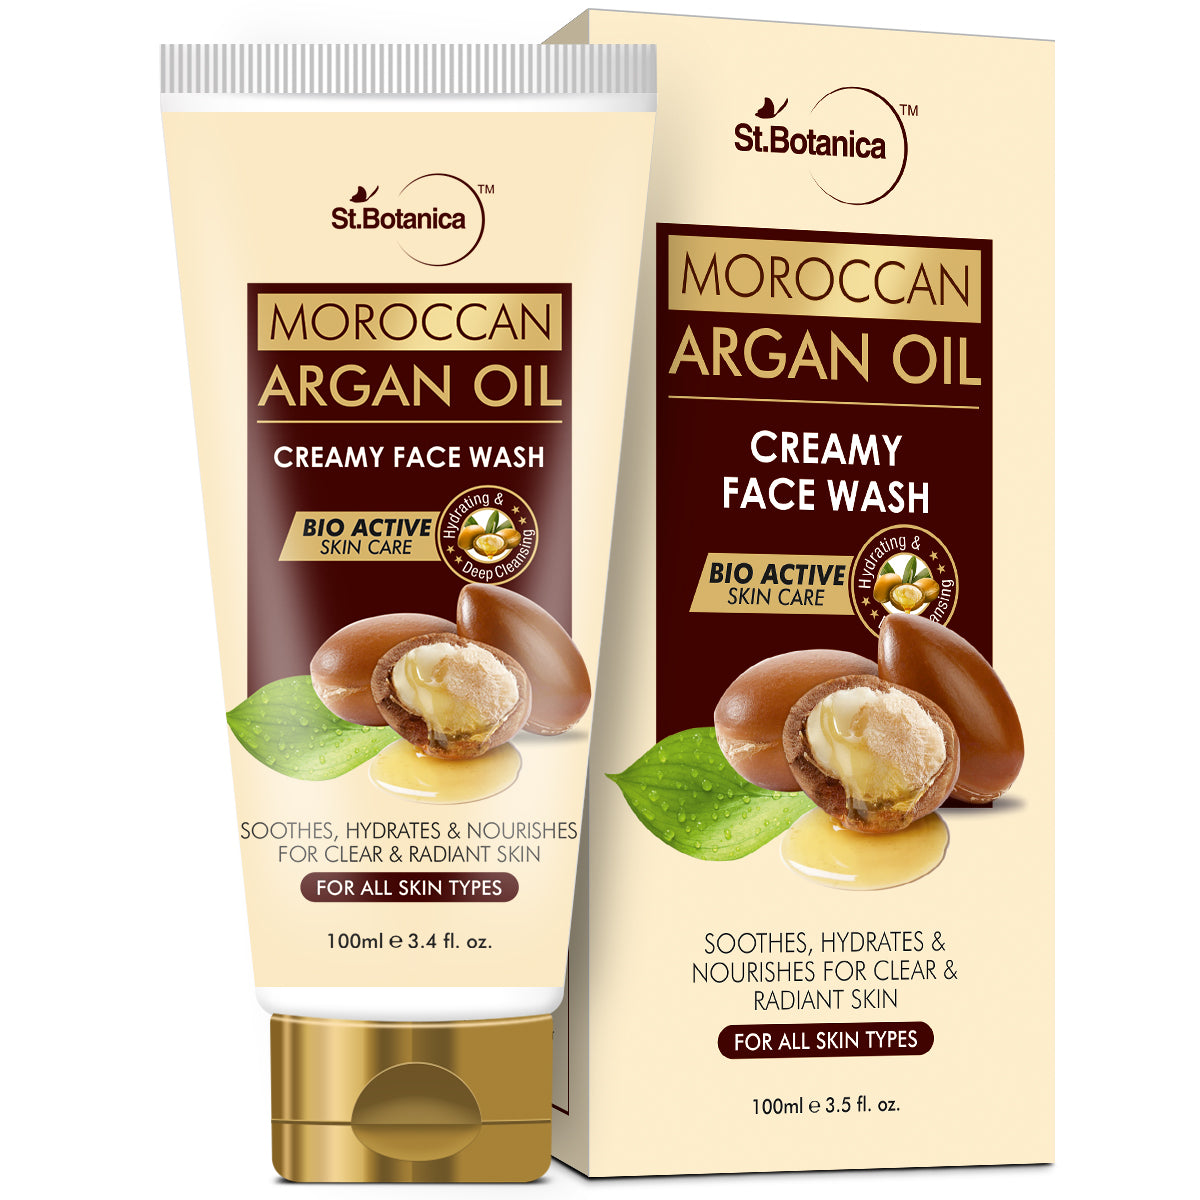 St.Botanica Moroccan Argan Oil Creamy Face Wash - Soothes, Hydrates, Nourishes For Clear & Radiant Skin - No Parabens, Sulphate, Silicones, 100 ml (STBOT554)